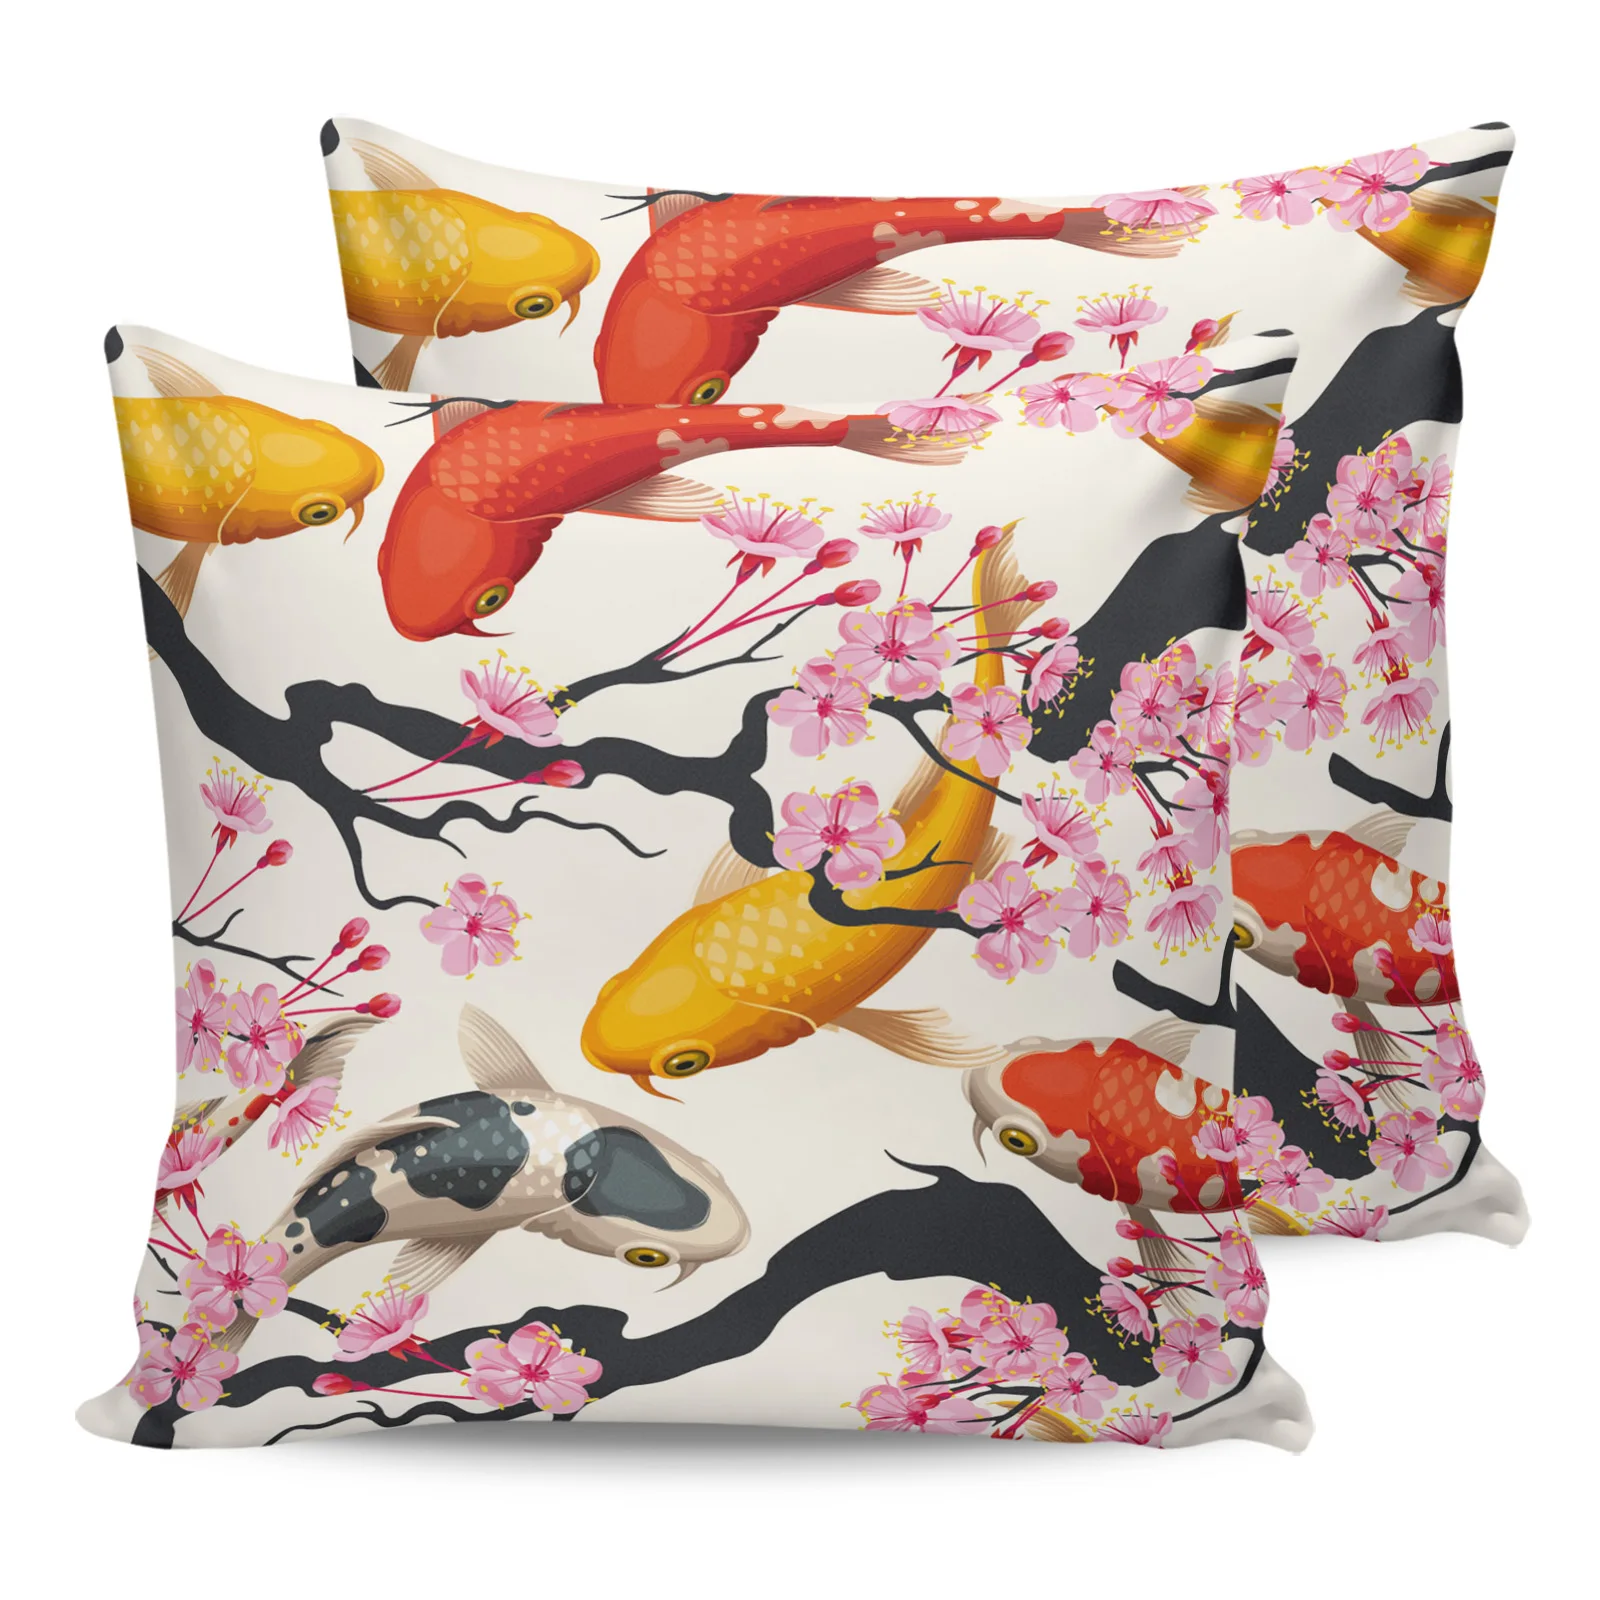 

2PCS Pillowcases Japanese Style Carp Cherry Blossom Cushion Cover Home Bedding Living Room Decorative Couch Throw Pillow Case